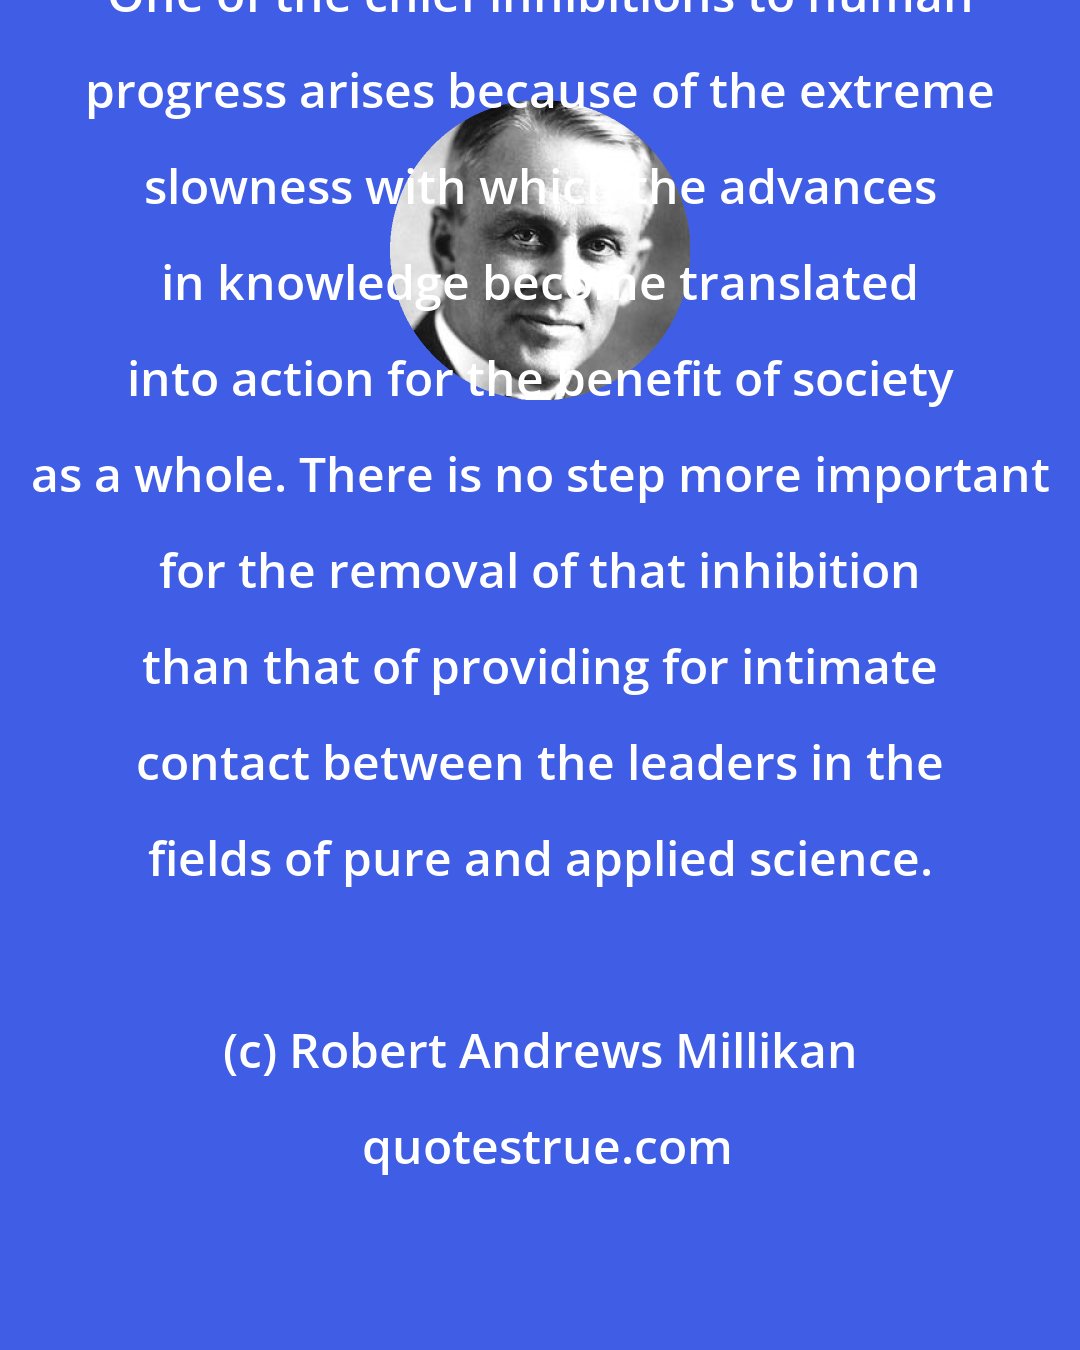 Robert Andrews Millikan: One of the chief inhibitions to human progress arises because of the extreme slowness with which the advances in knowledge become translated into action for the benefit of society as a whole. There is no step more important for the removal of that inhibition than that of providing for intimate contact between the leaders in the fields of pure and applied science.